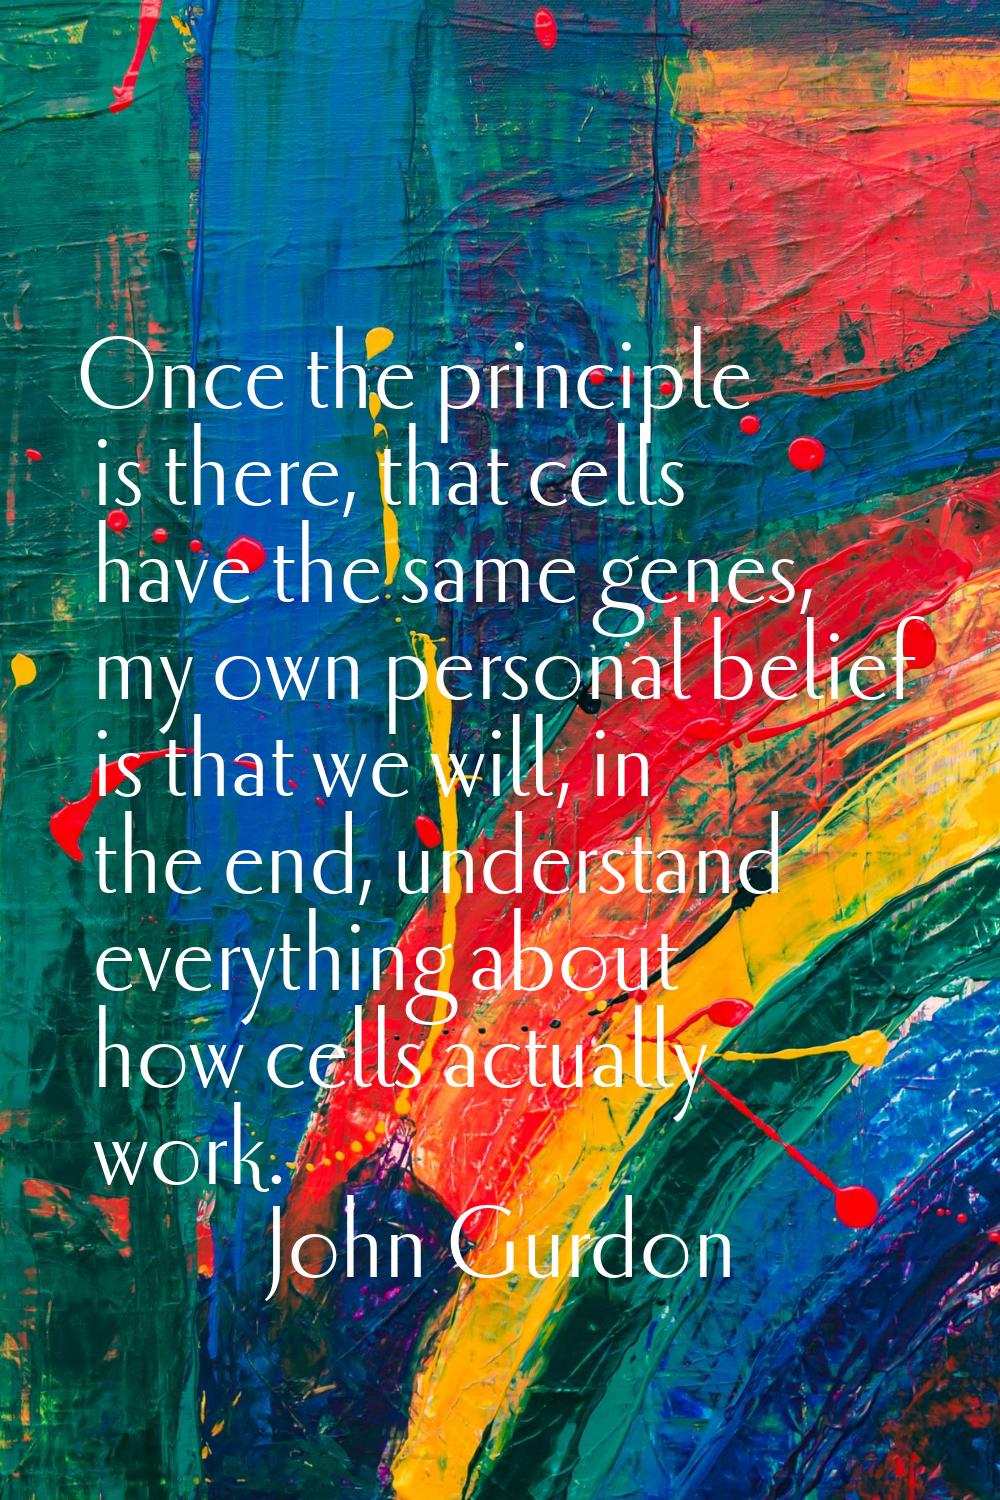 Once the principle is there, that cells have the same genes, my own personal belief is that we will